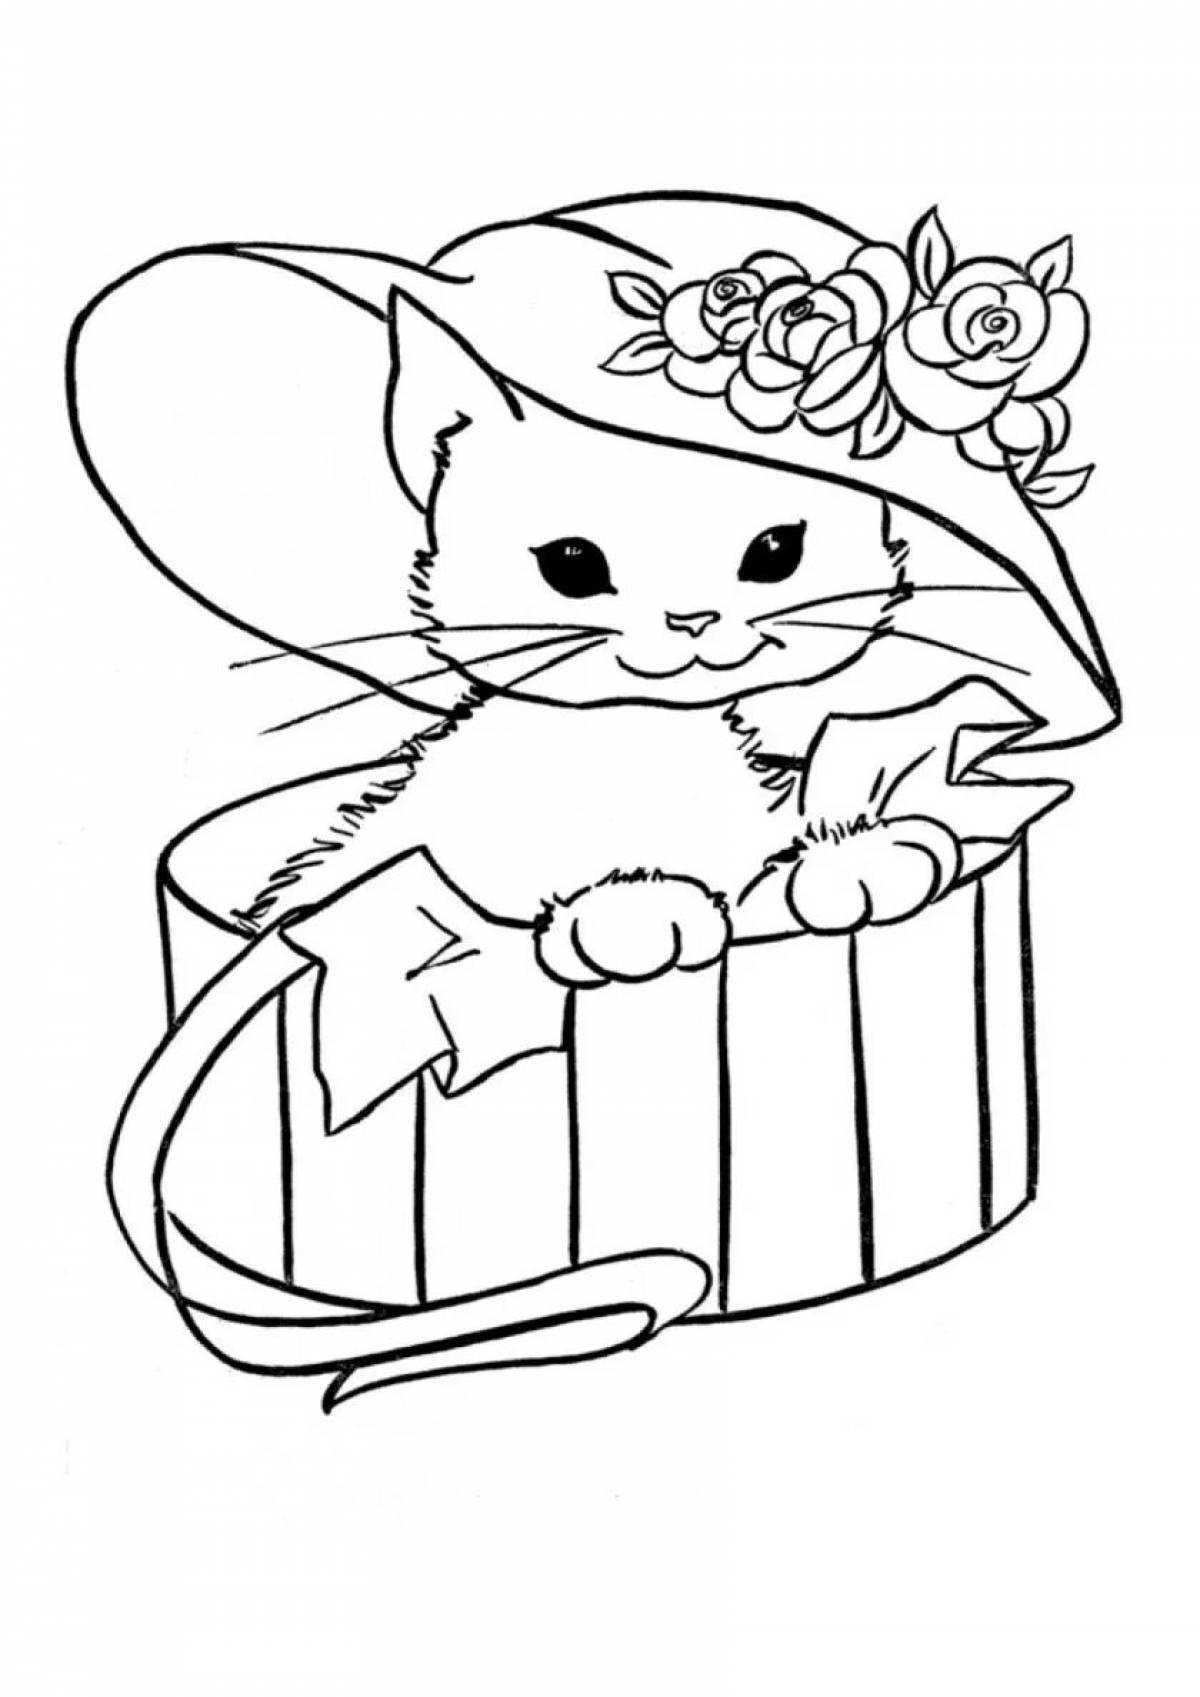 Invigorating coloring book for girls 12 years old cute cats